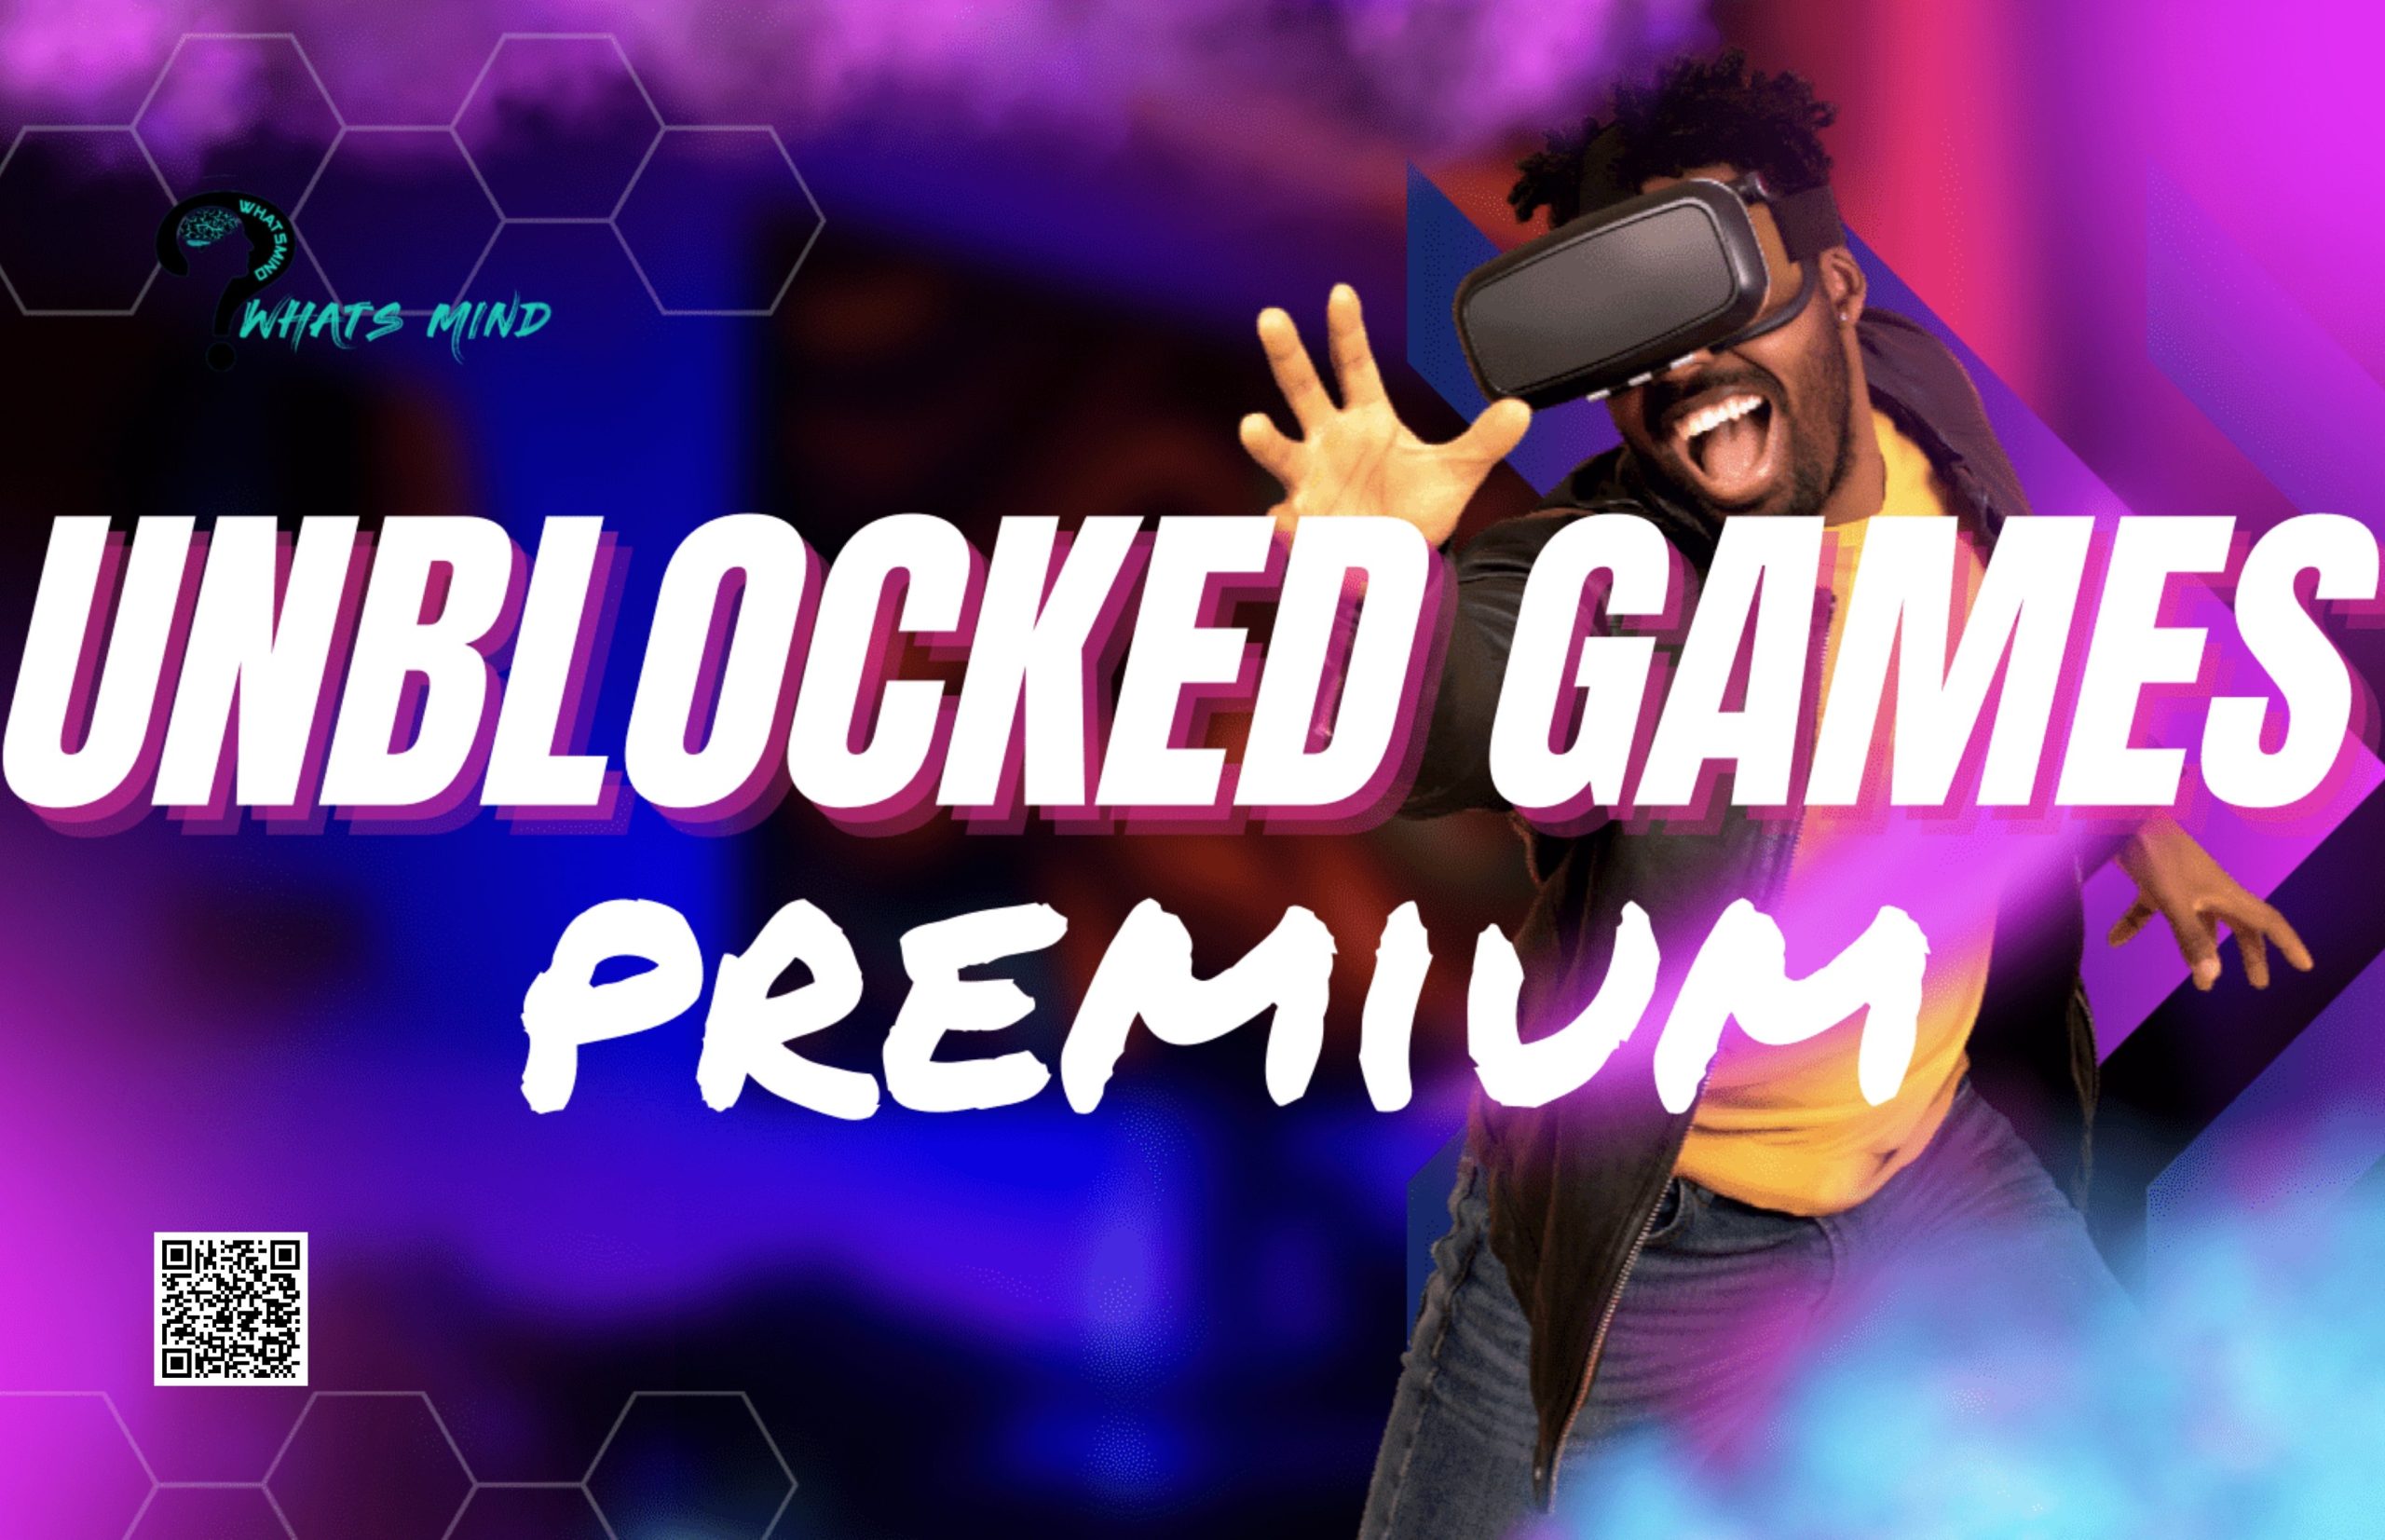 Unblocked Games 999: An Entertaining Escape from Online Restrictions -  Whatsmind: Technology, Sports, Health, Trending, Business